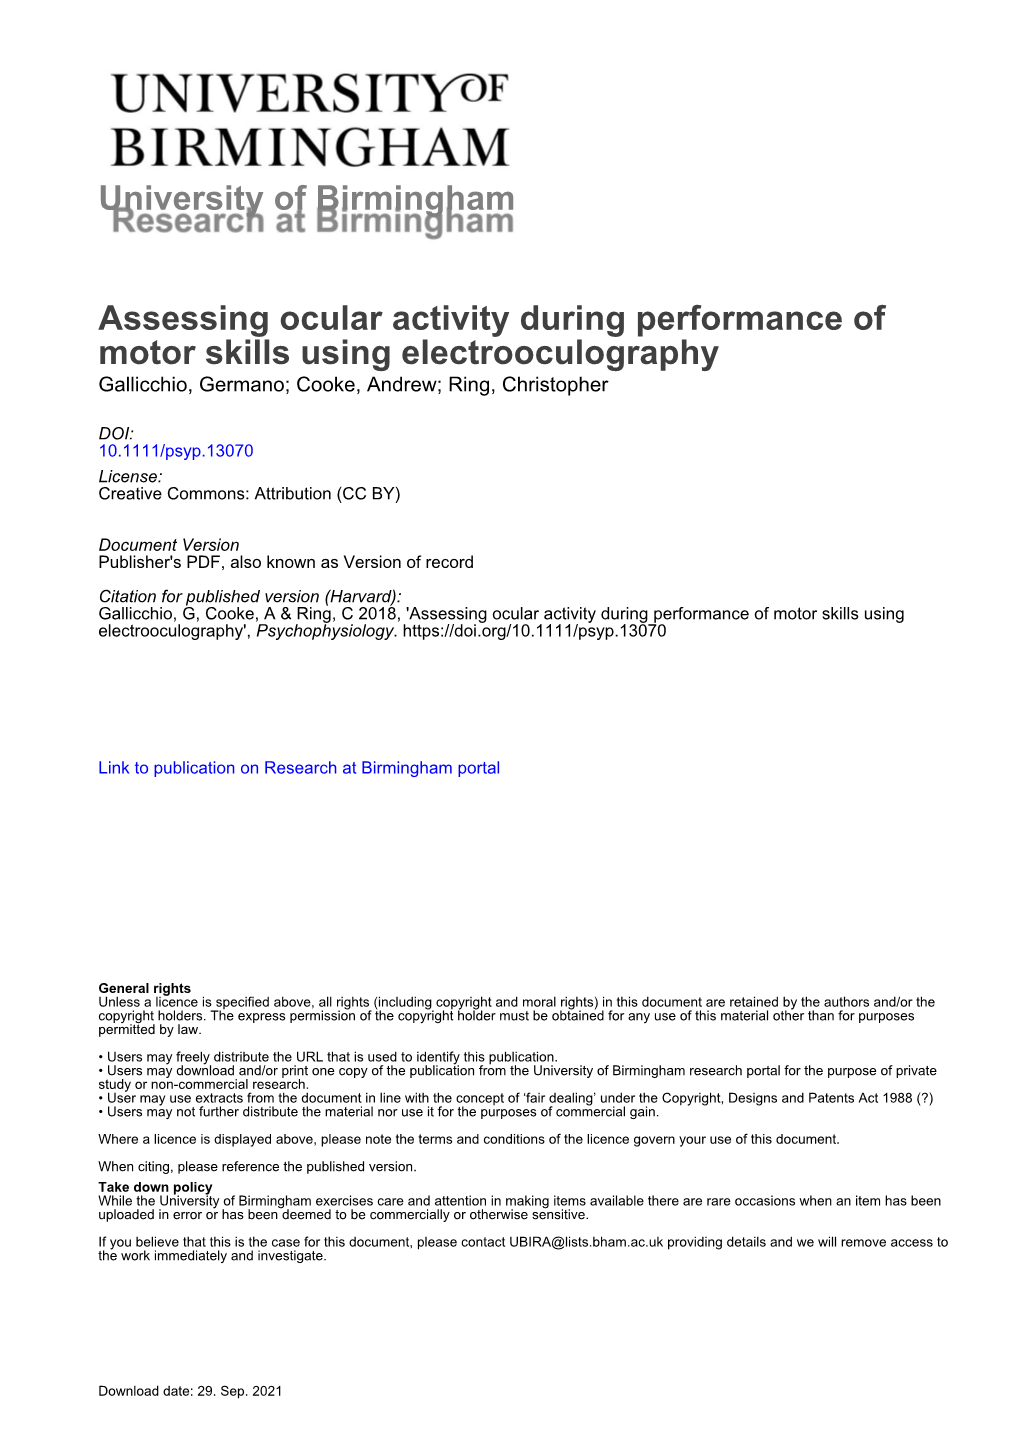 Assessing Ocular Activity During Performance of Motor Skills Using Electrooculography Gallicchio, Germano; Cooke, Andrew; Ring, Christopher